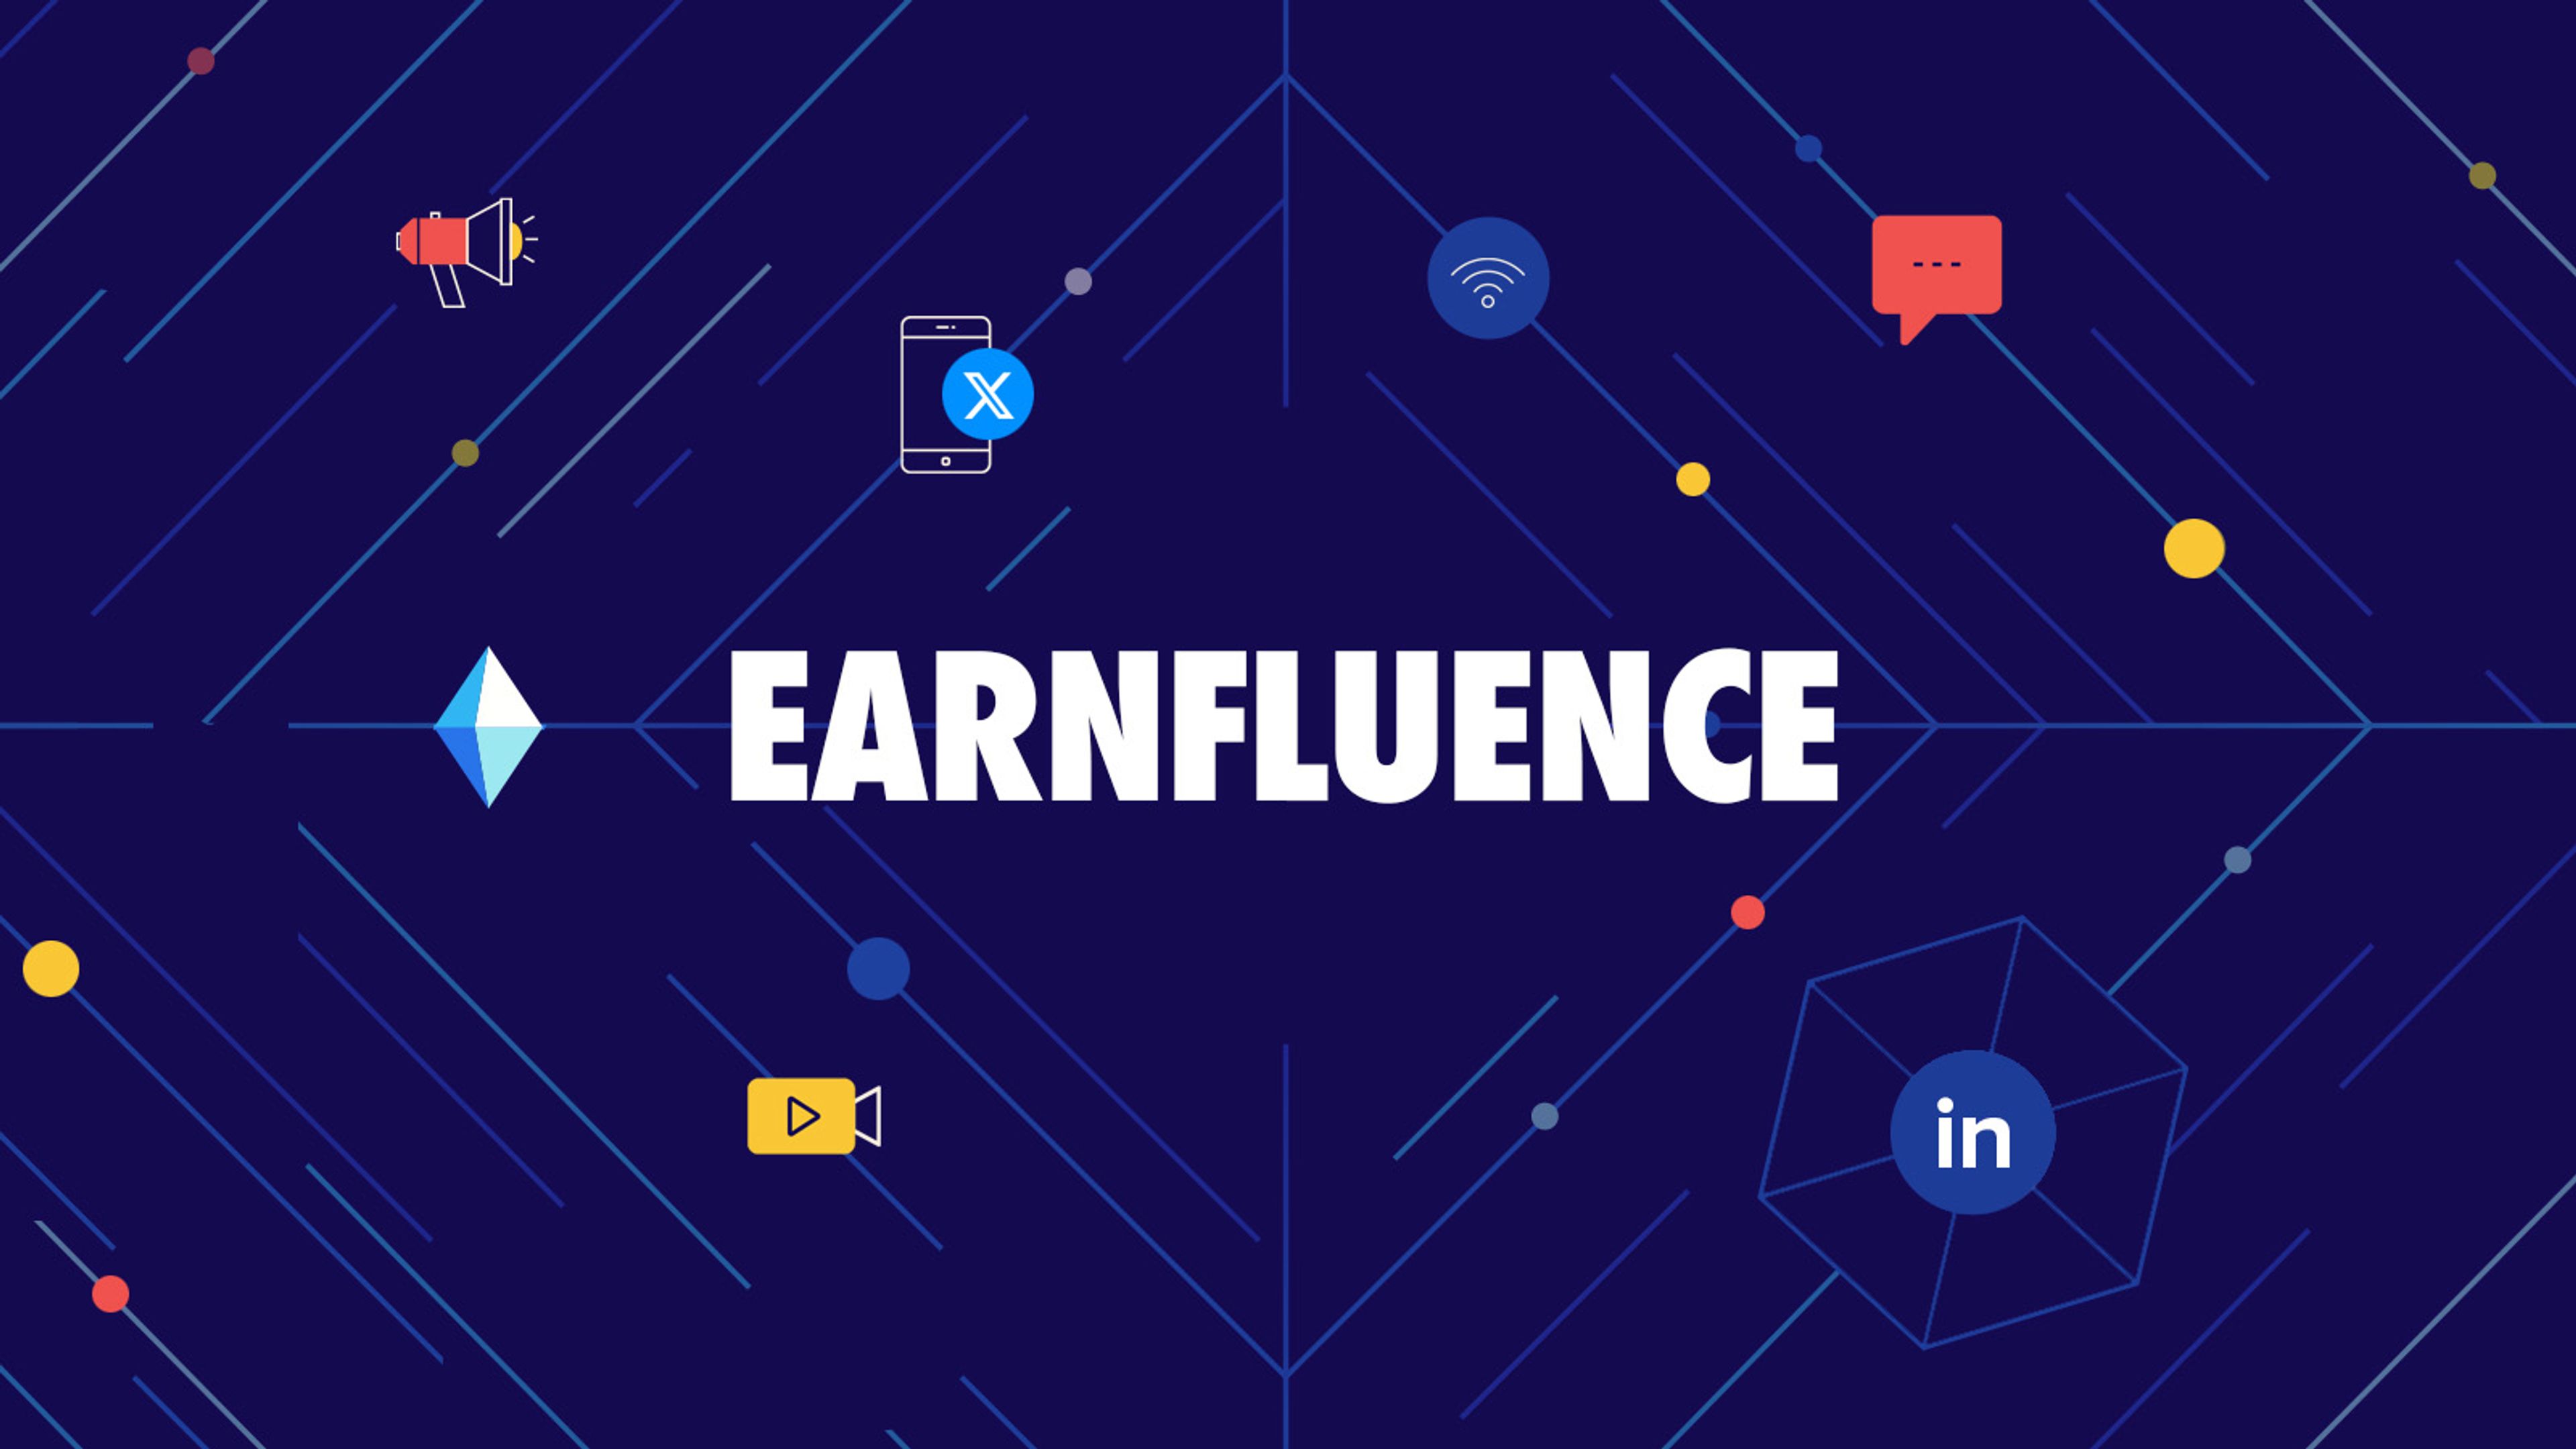 The word "EARNFLUENCE" again a dark background with vector graphics of different media